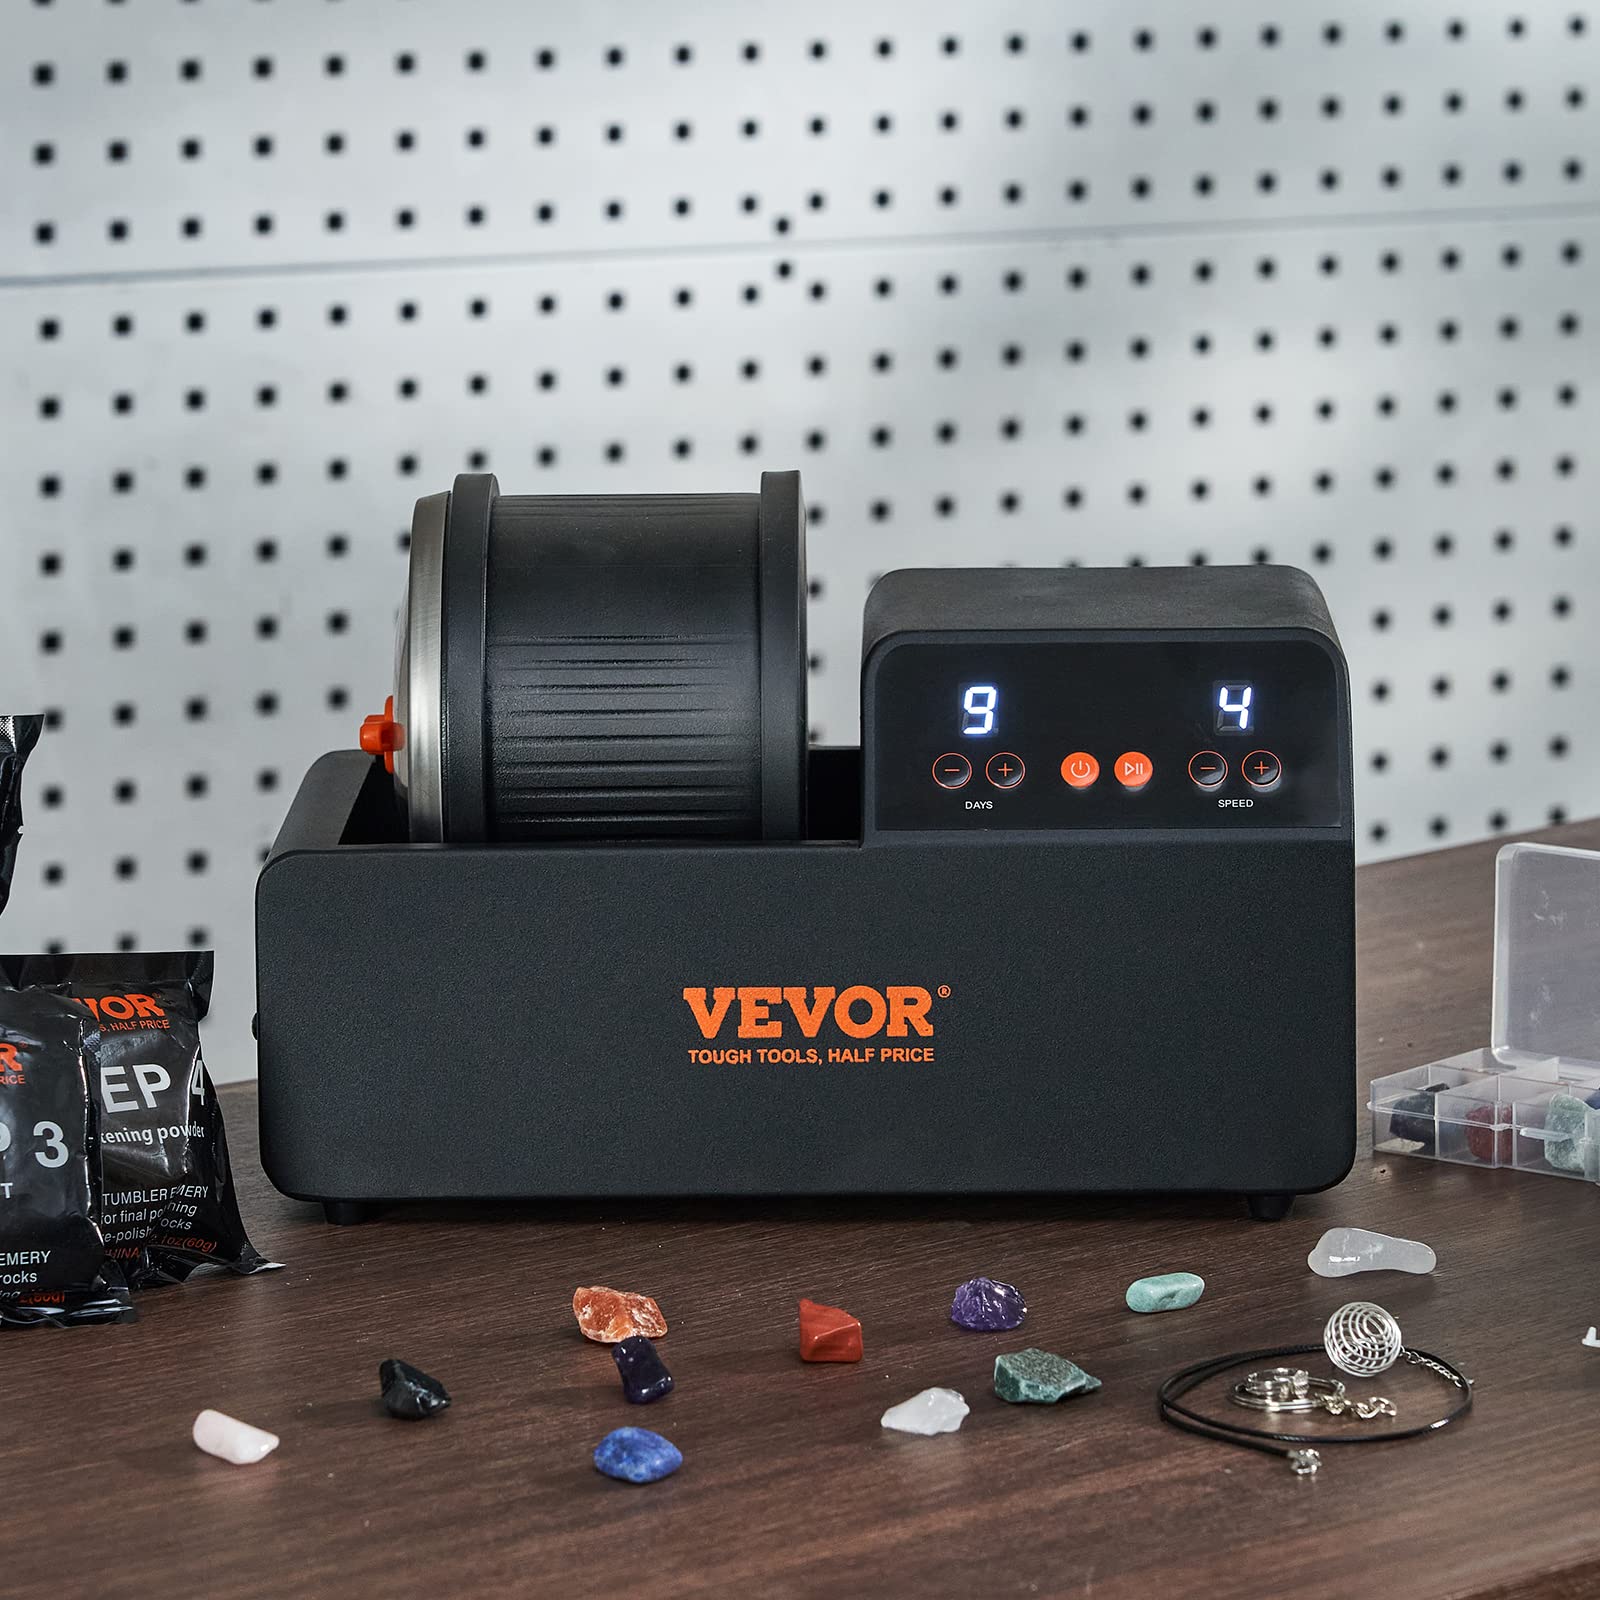 VEVOR 3LB Rock Tumbler Kit, Direct Drive Professional Rock Tumbler, 4-Speed/9-Day Timer, Rock Polisher with Rough Gemstones/Grits/Jewelry Fastenings, Stone Polishing Kit for Adults Kids, STEM Gift